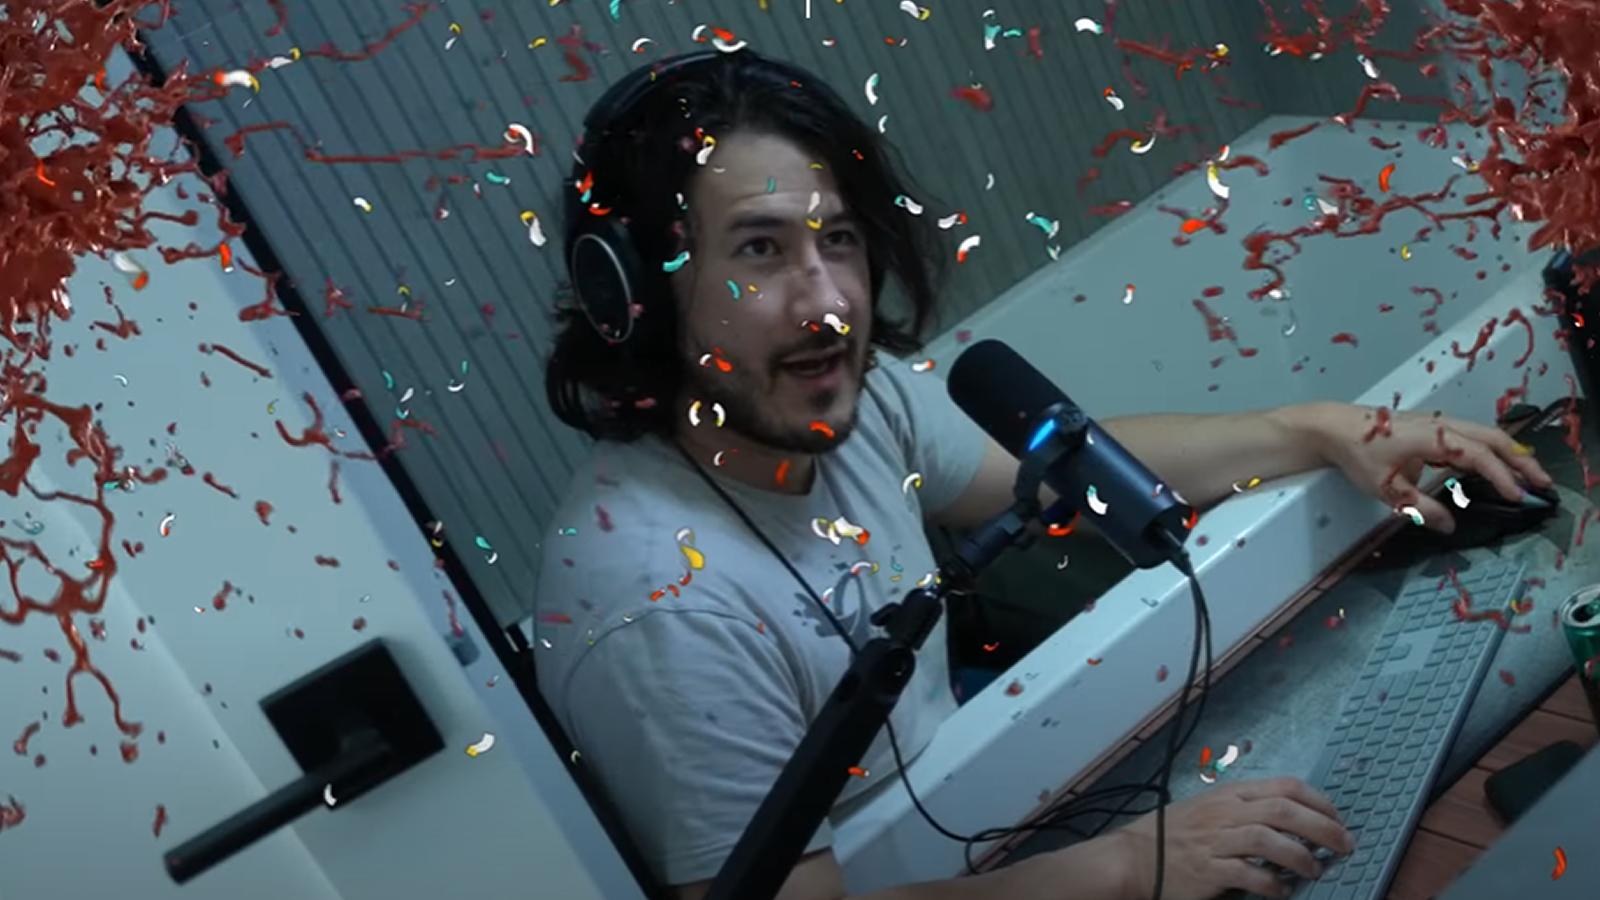 Markiplier in his bathtub with confetti and blood splatters edited on top.